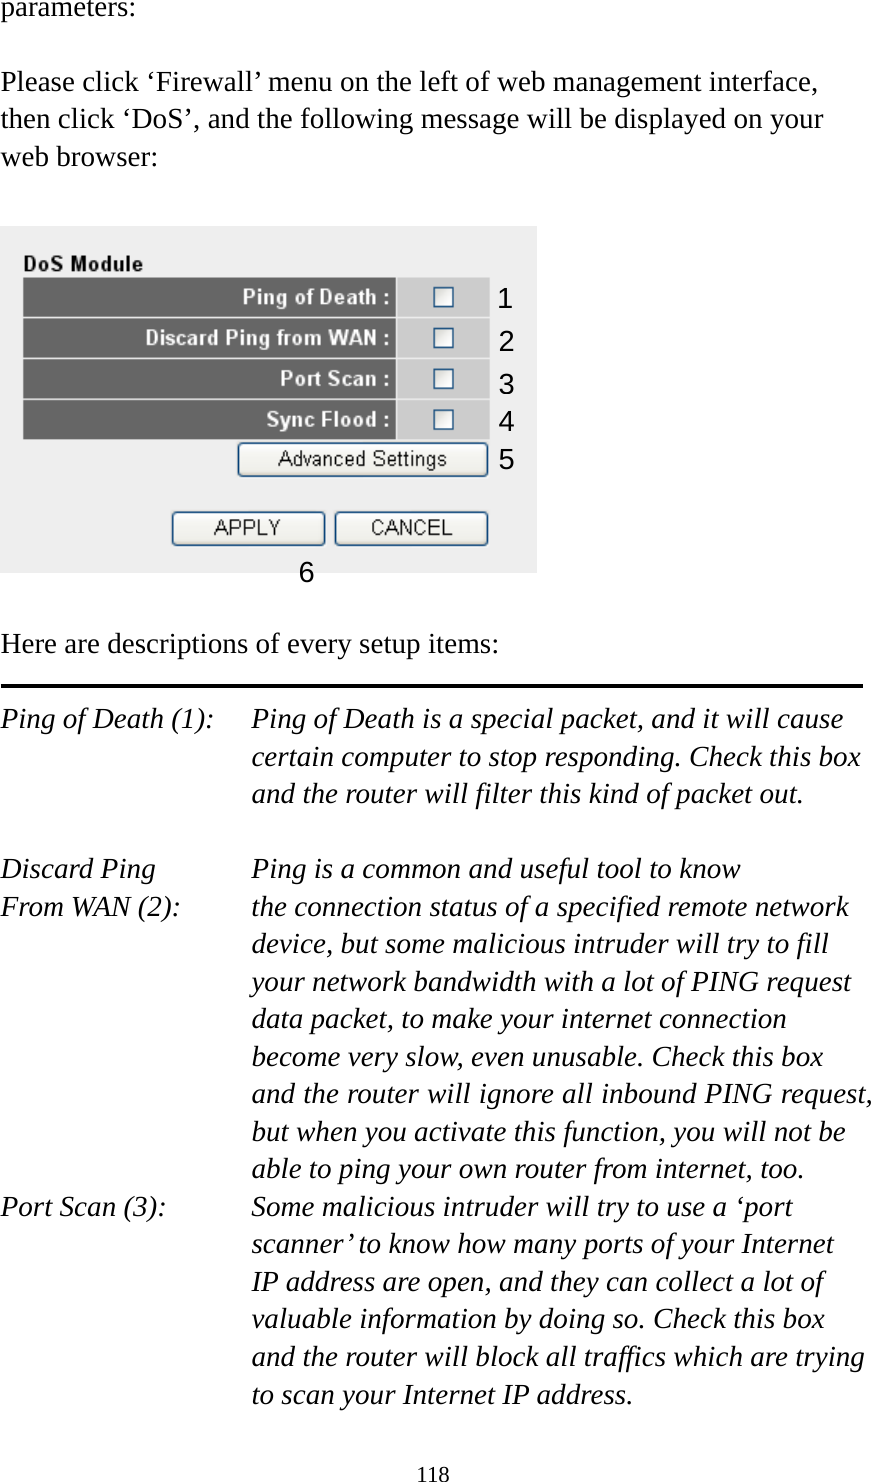 118 parameters:  Please click ‘Firewall’ menu on the left of web management interface, then click ‘DoS’, and the following message will be displayed on your web browser:    Here are descriptions of every setup items:  Ping of Death (1):    Ping of Death is a special packet, and it will cause certain computer to stop responding. Check this box and the router will filter this kind of packet out.  Discard Ping      Ping is a common and useful tool to know From WAN (2):    the connection status of a specified remote network device, but some malicious intruder will try to fill your network bandwidth with a lot of PING request data packet, to make your internet connection become very slow, even unusable. Check this box and the router will ignore all inbound PING request, but when you activate this function, you will not be able to ping your own router from internet, too. Port Scan (3):    Some malicious intruder will try to use a ‘port scanner’ to know how many ports of your Internet IP address are open, and they can collect a lot of valuable information by doing so. Check this box and the router will block all traffics which are trying to scan your Internet IP address. 12 3456 